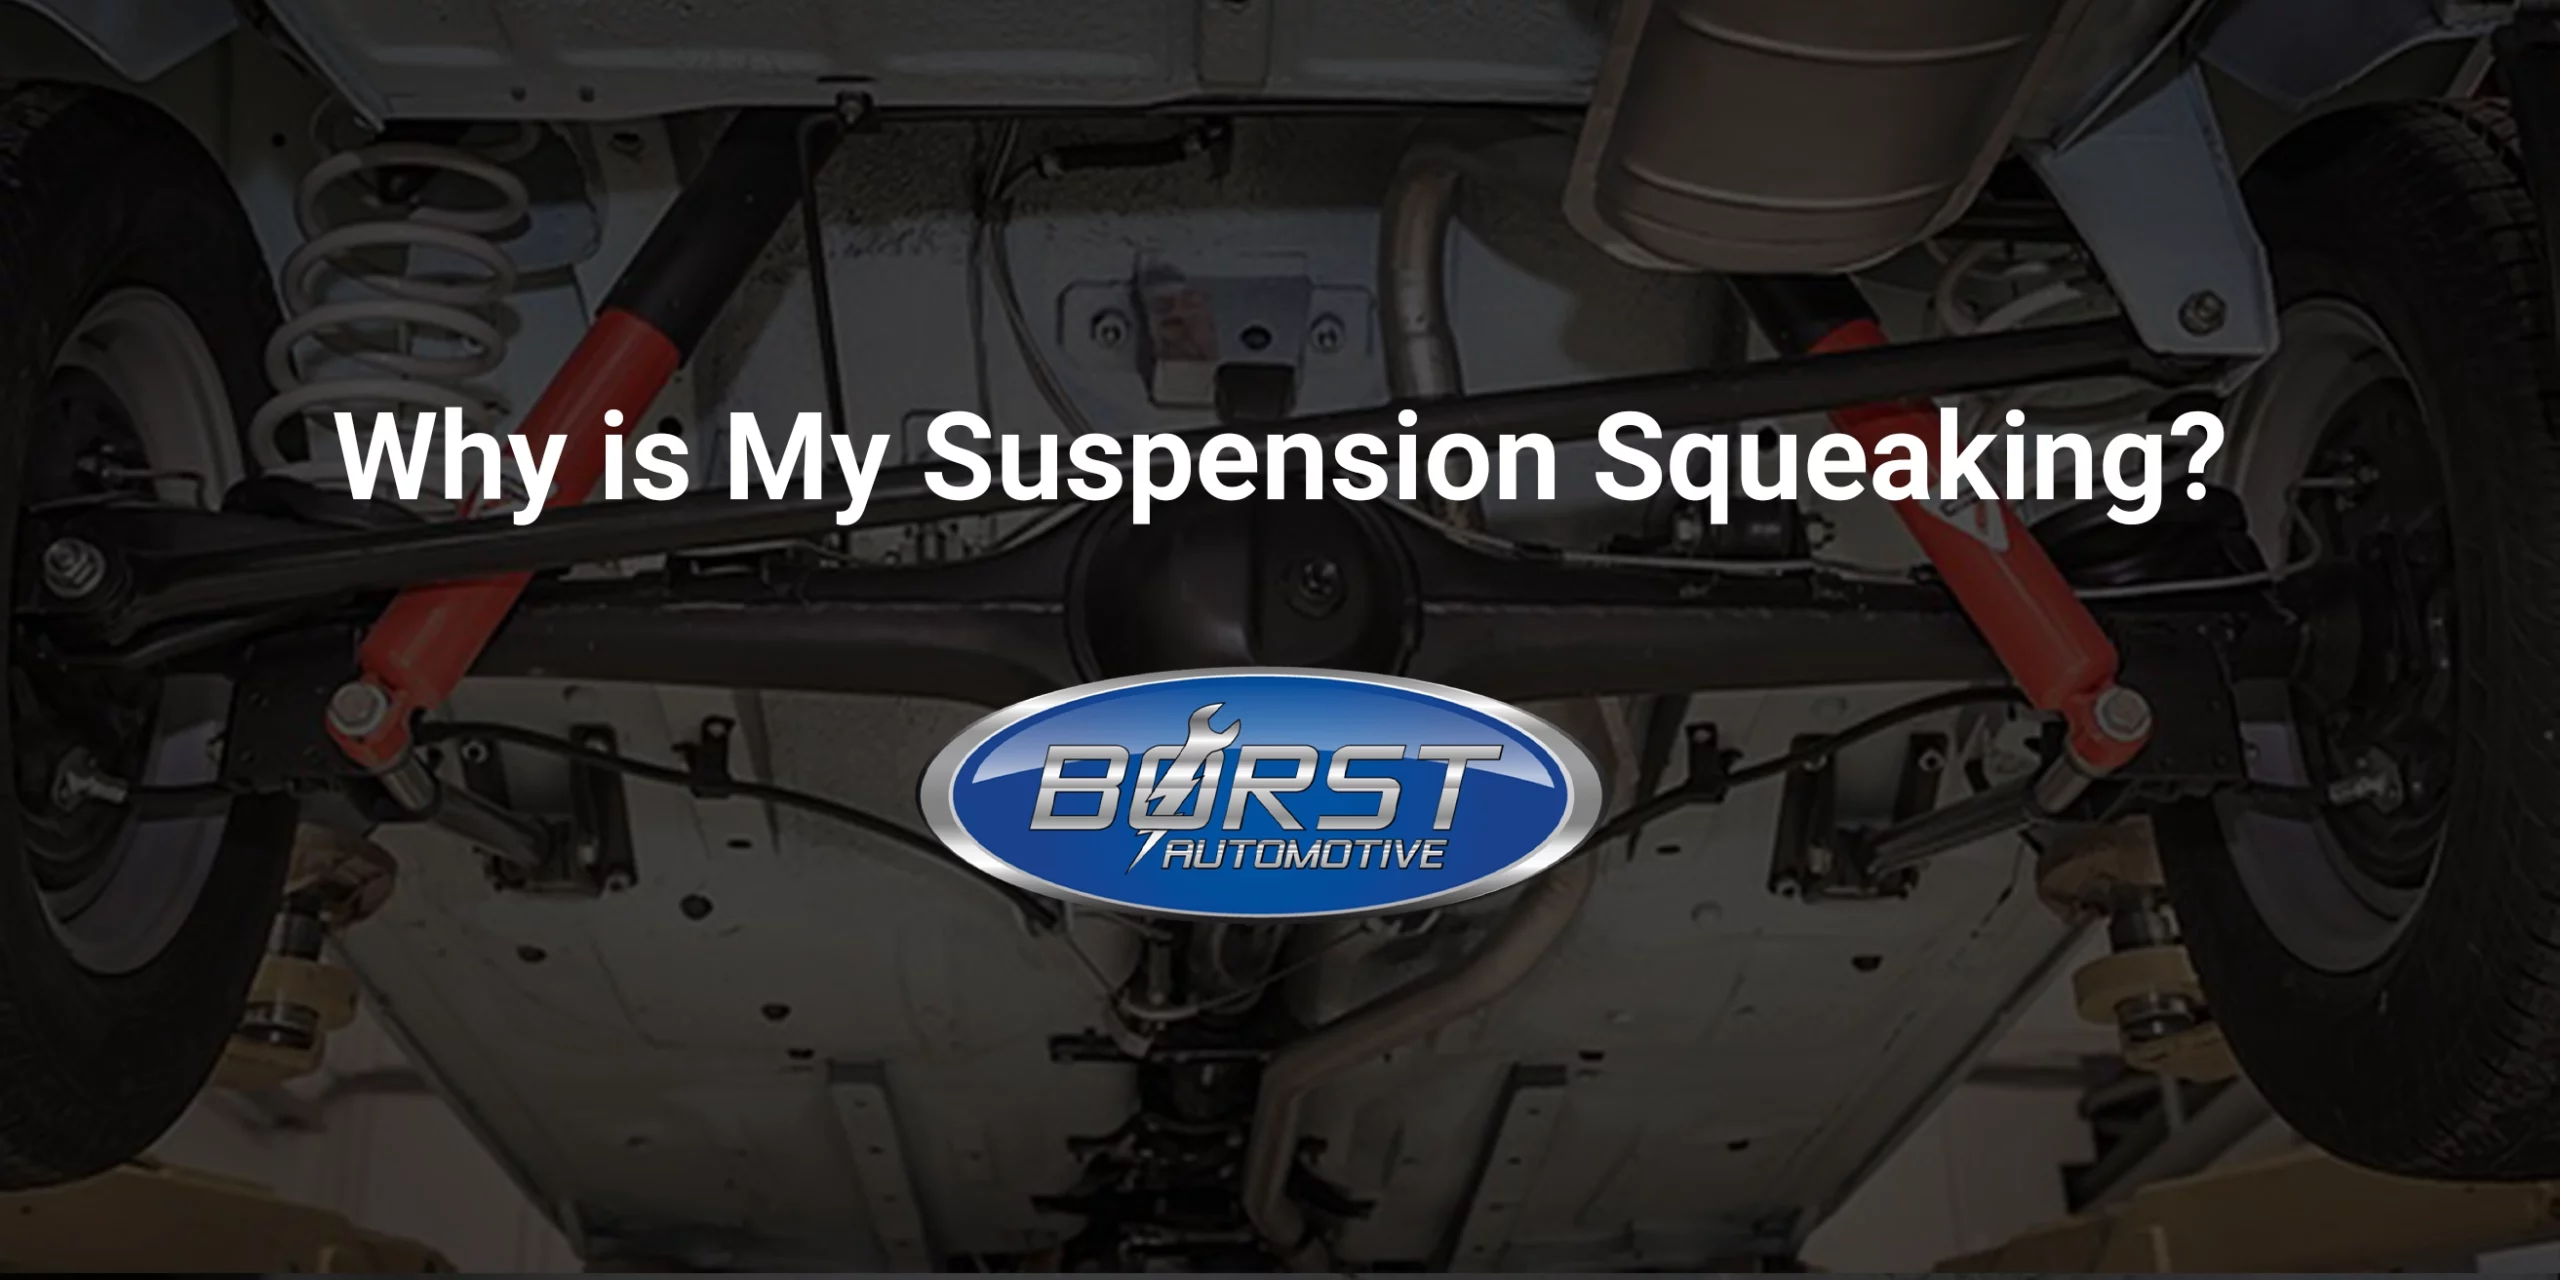 Why is My Suspension Squeaking?